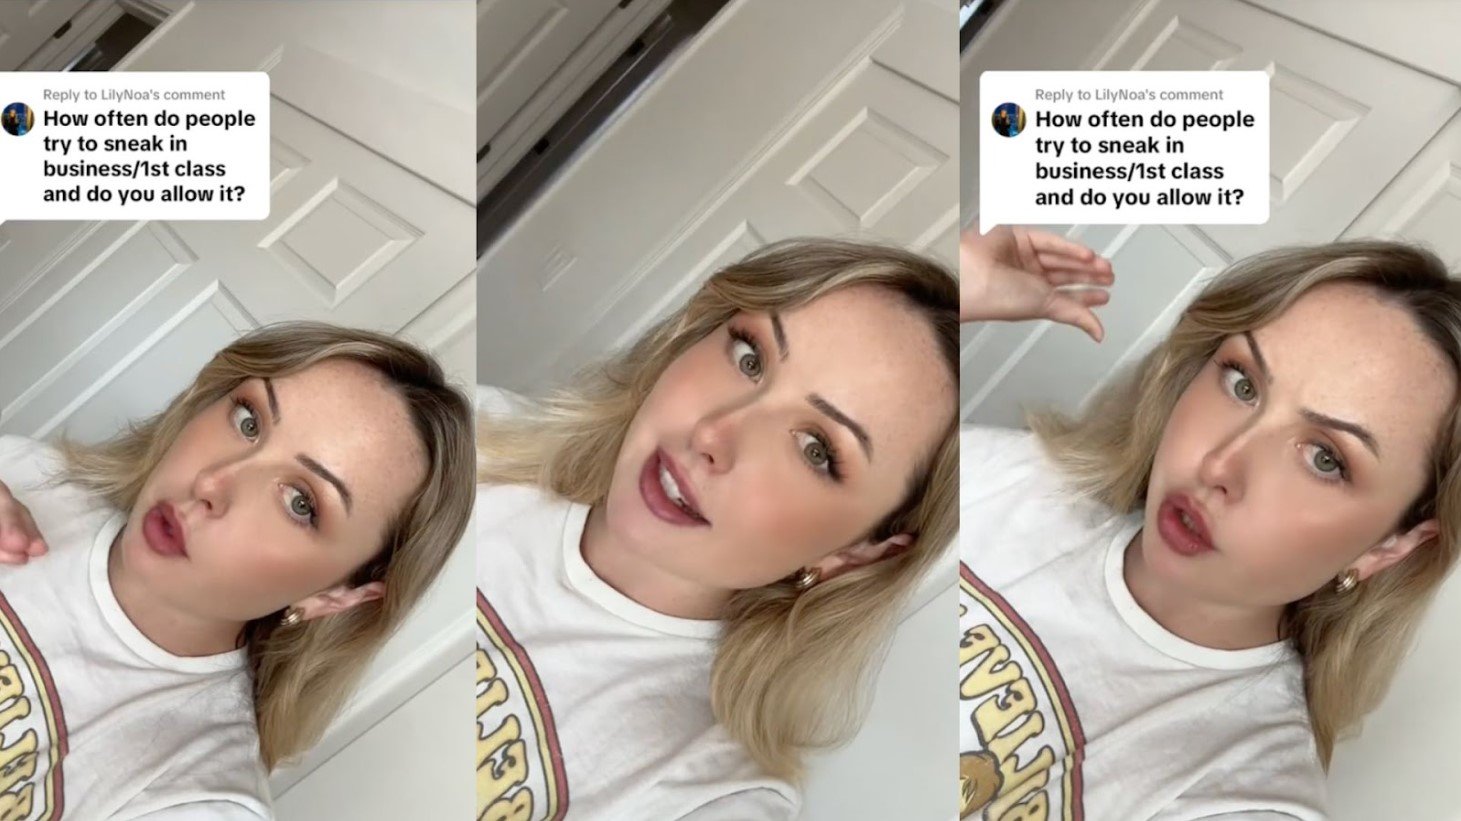 A collage of three screenshots from a viral video featuring a young female flight attendant with blonde hair. She is wearing a white t-shirt with a graphic design and is responding to a comment that is overlaid on the video